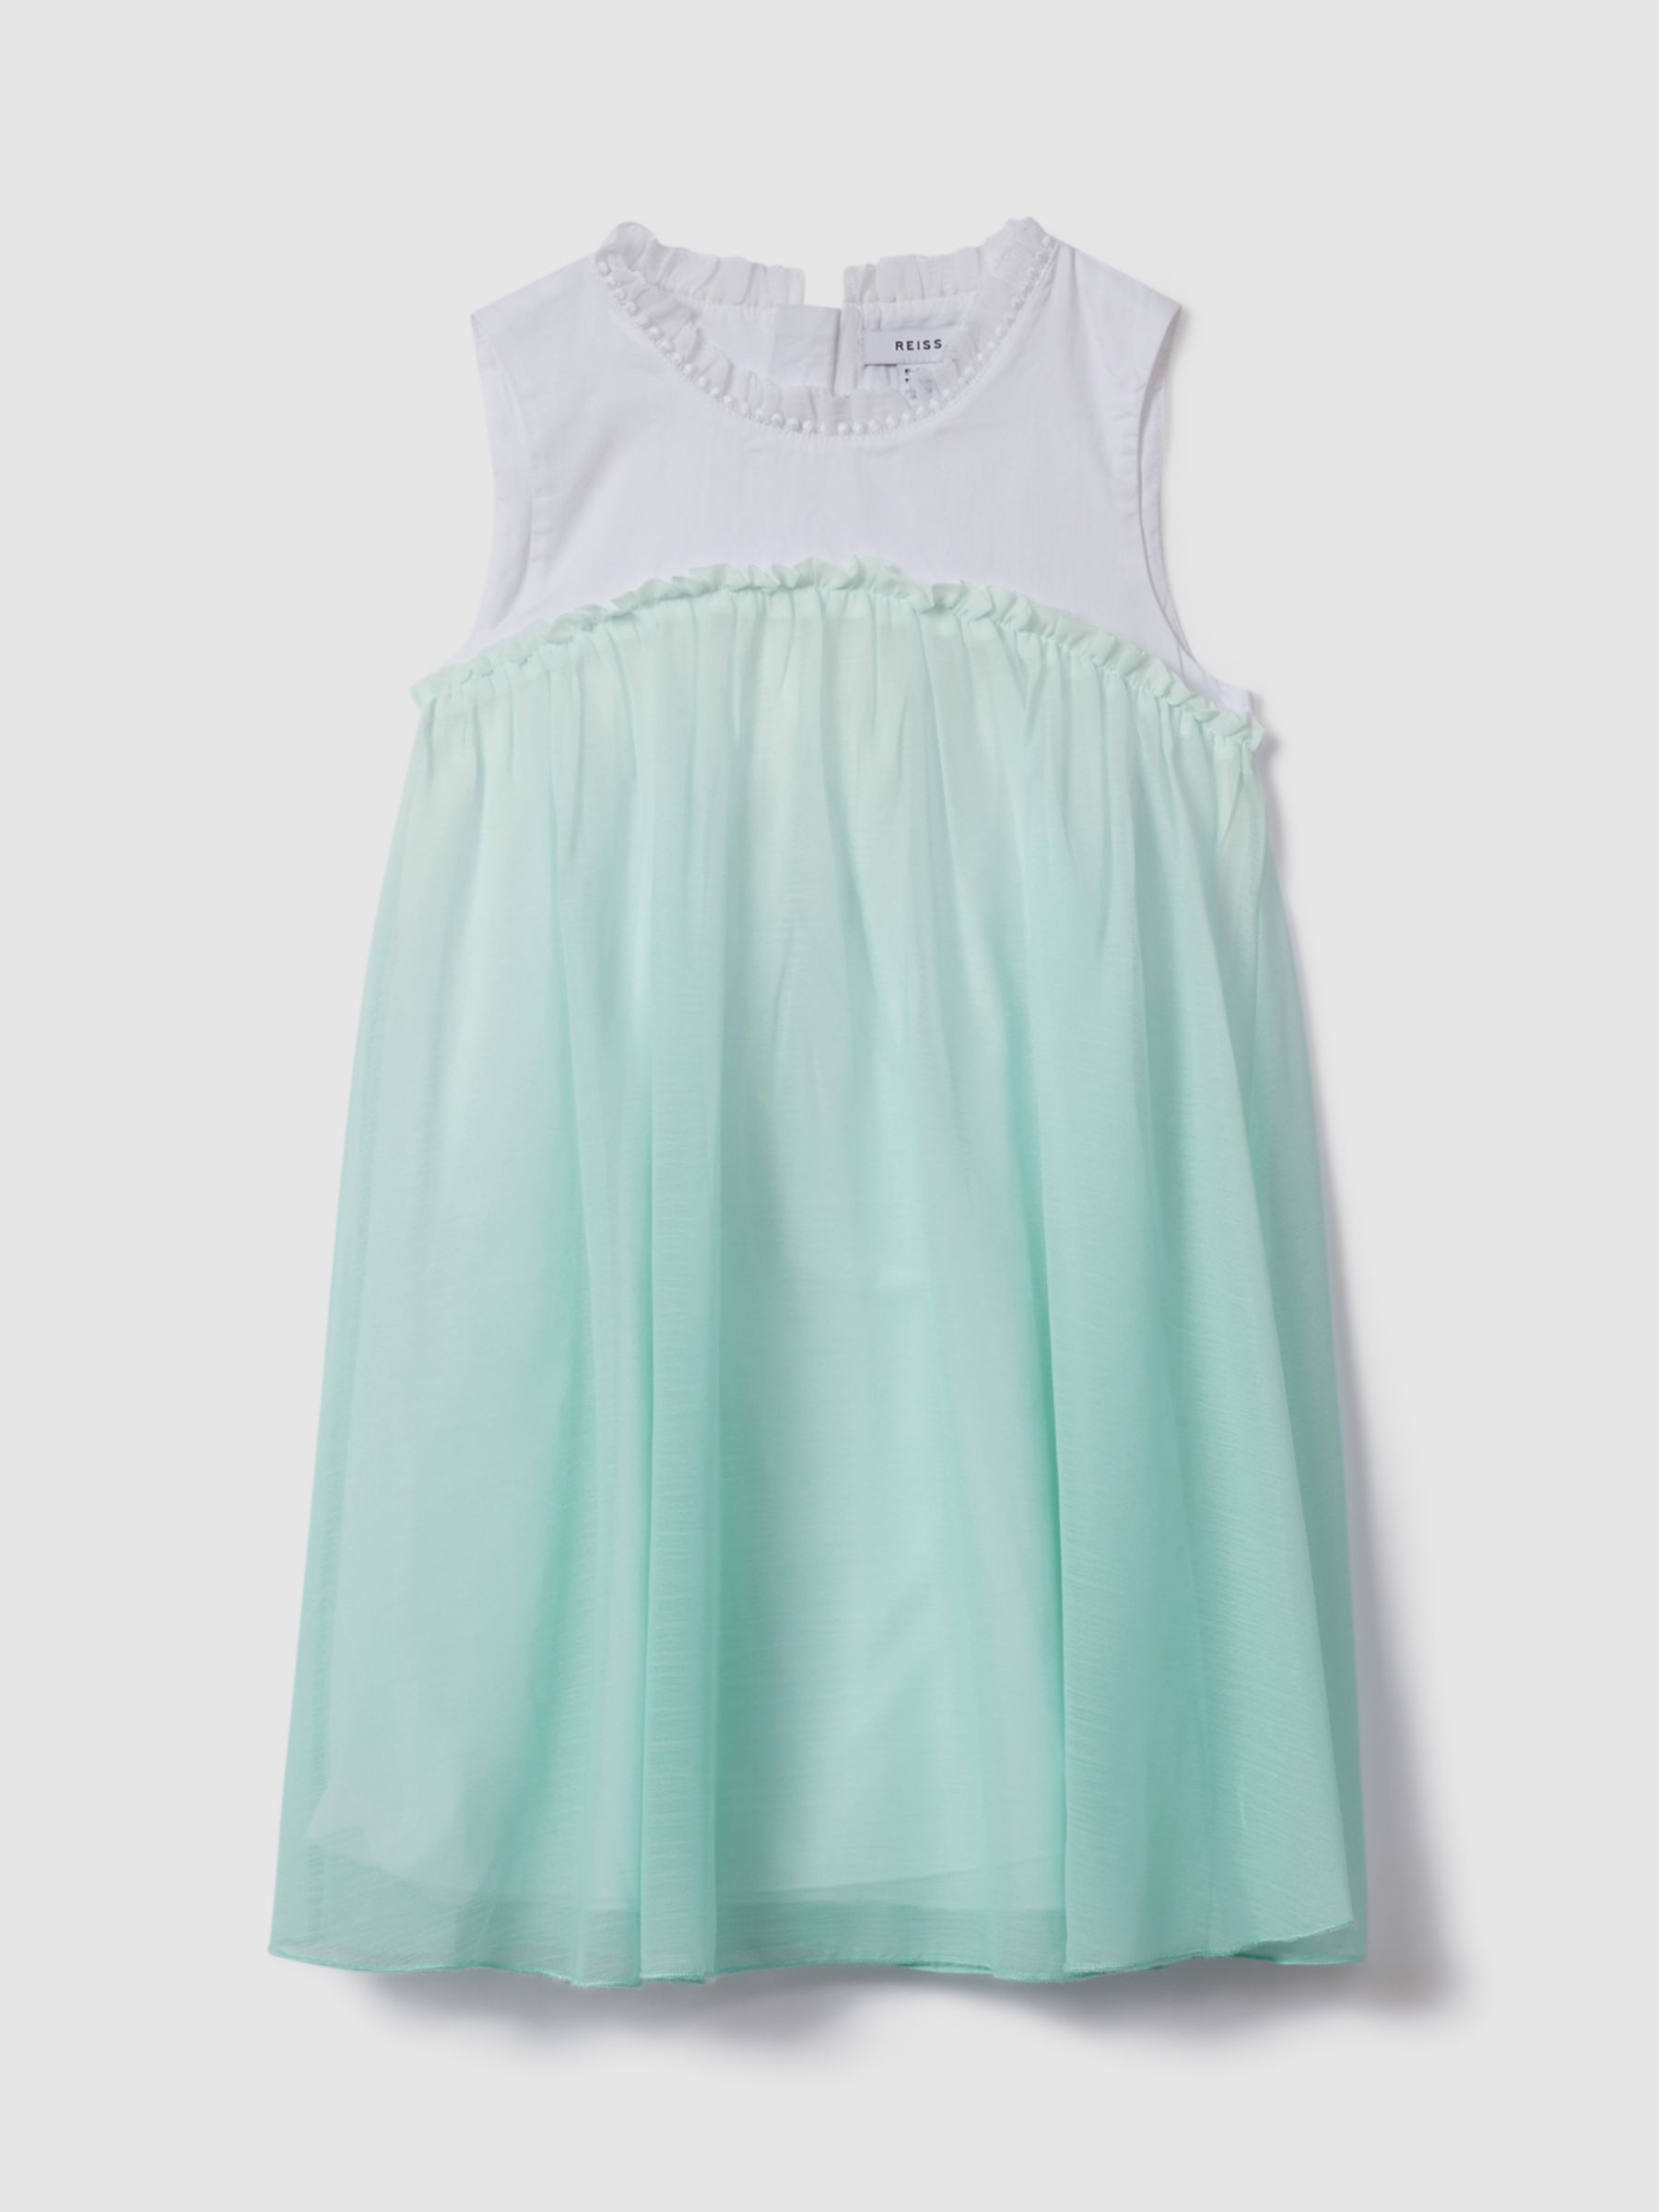 Reiss Kids' Coco Ombre Tulle Tired Dress, Blue, 4-5 years